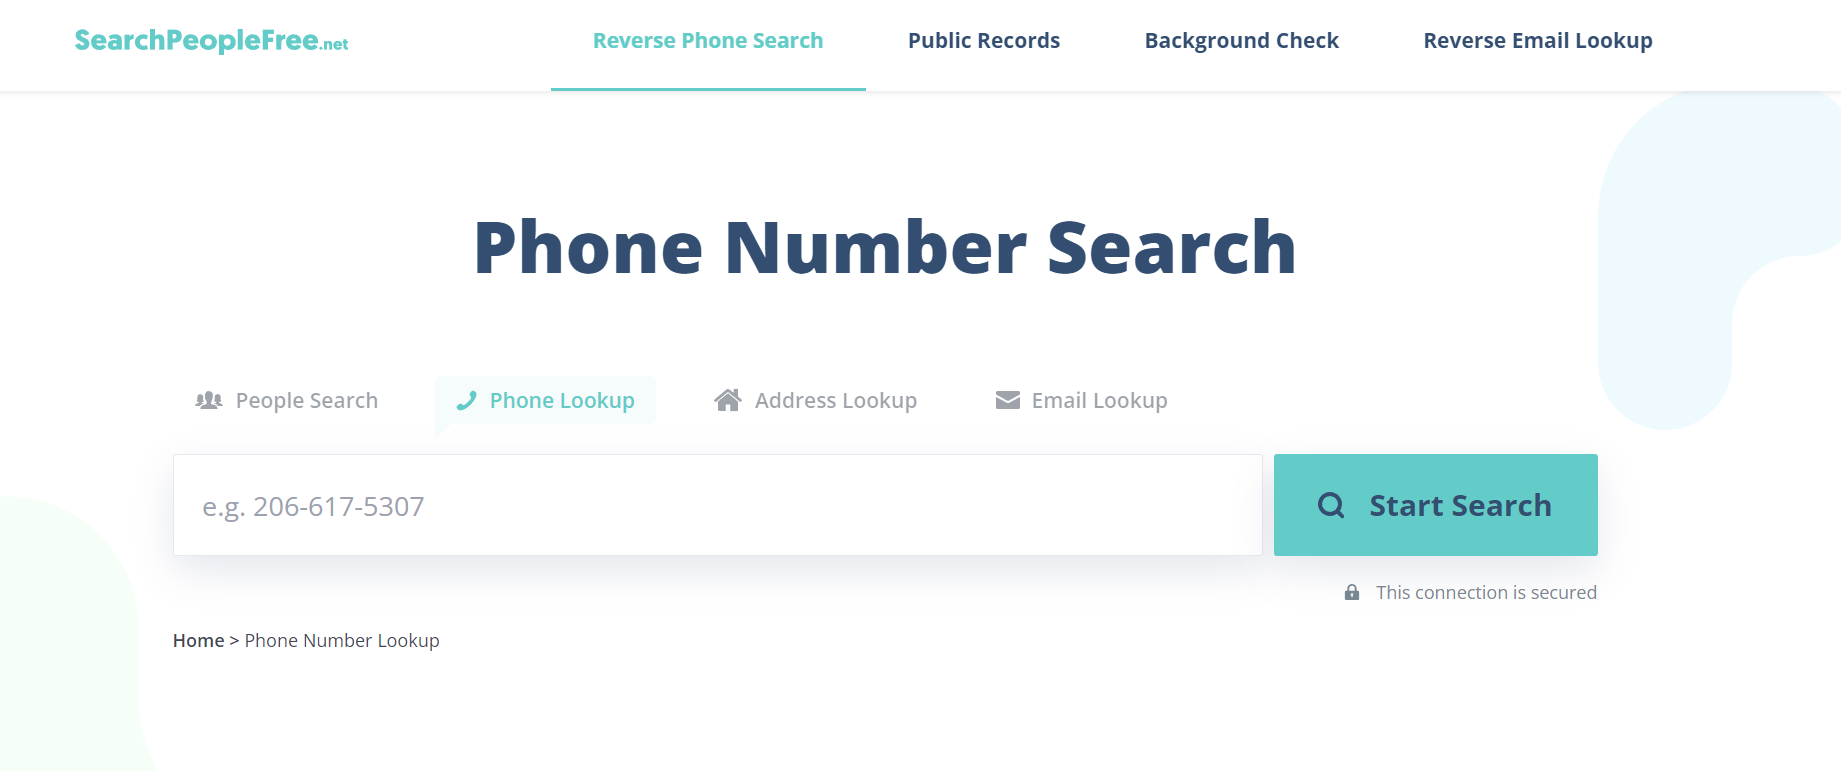 SearchPeopleFree Review